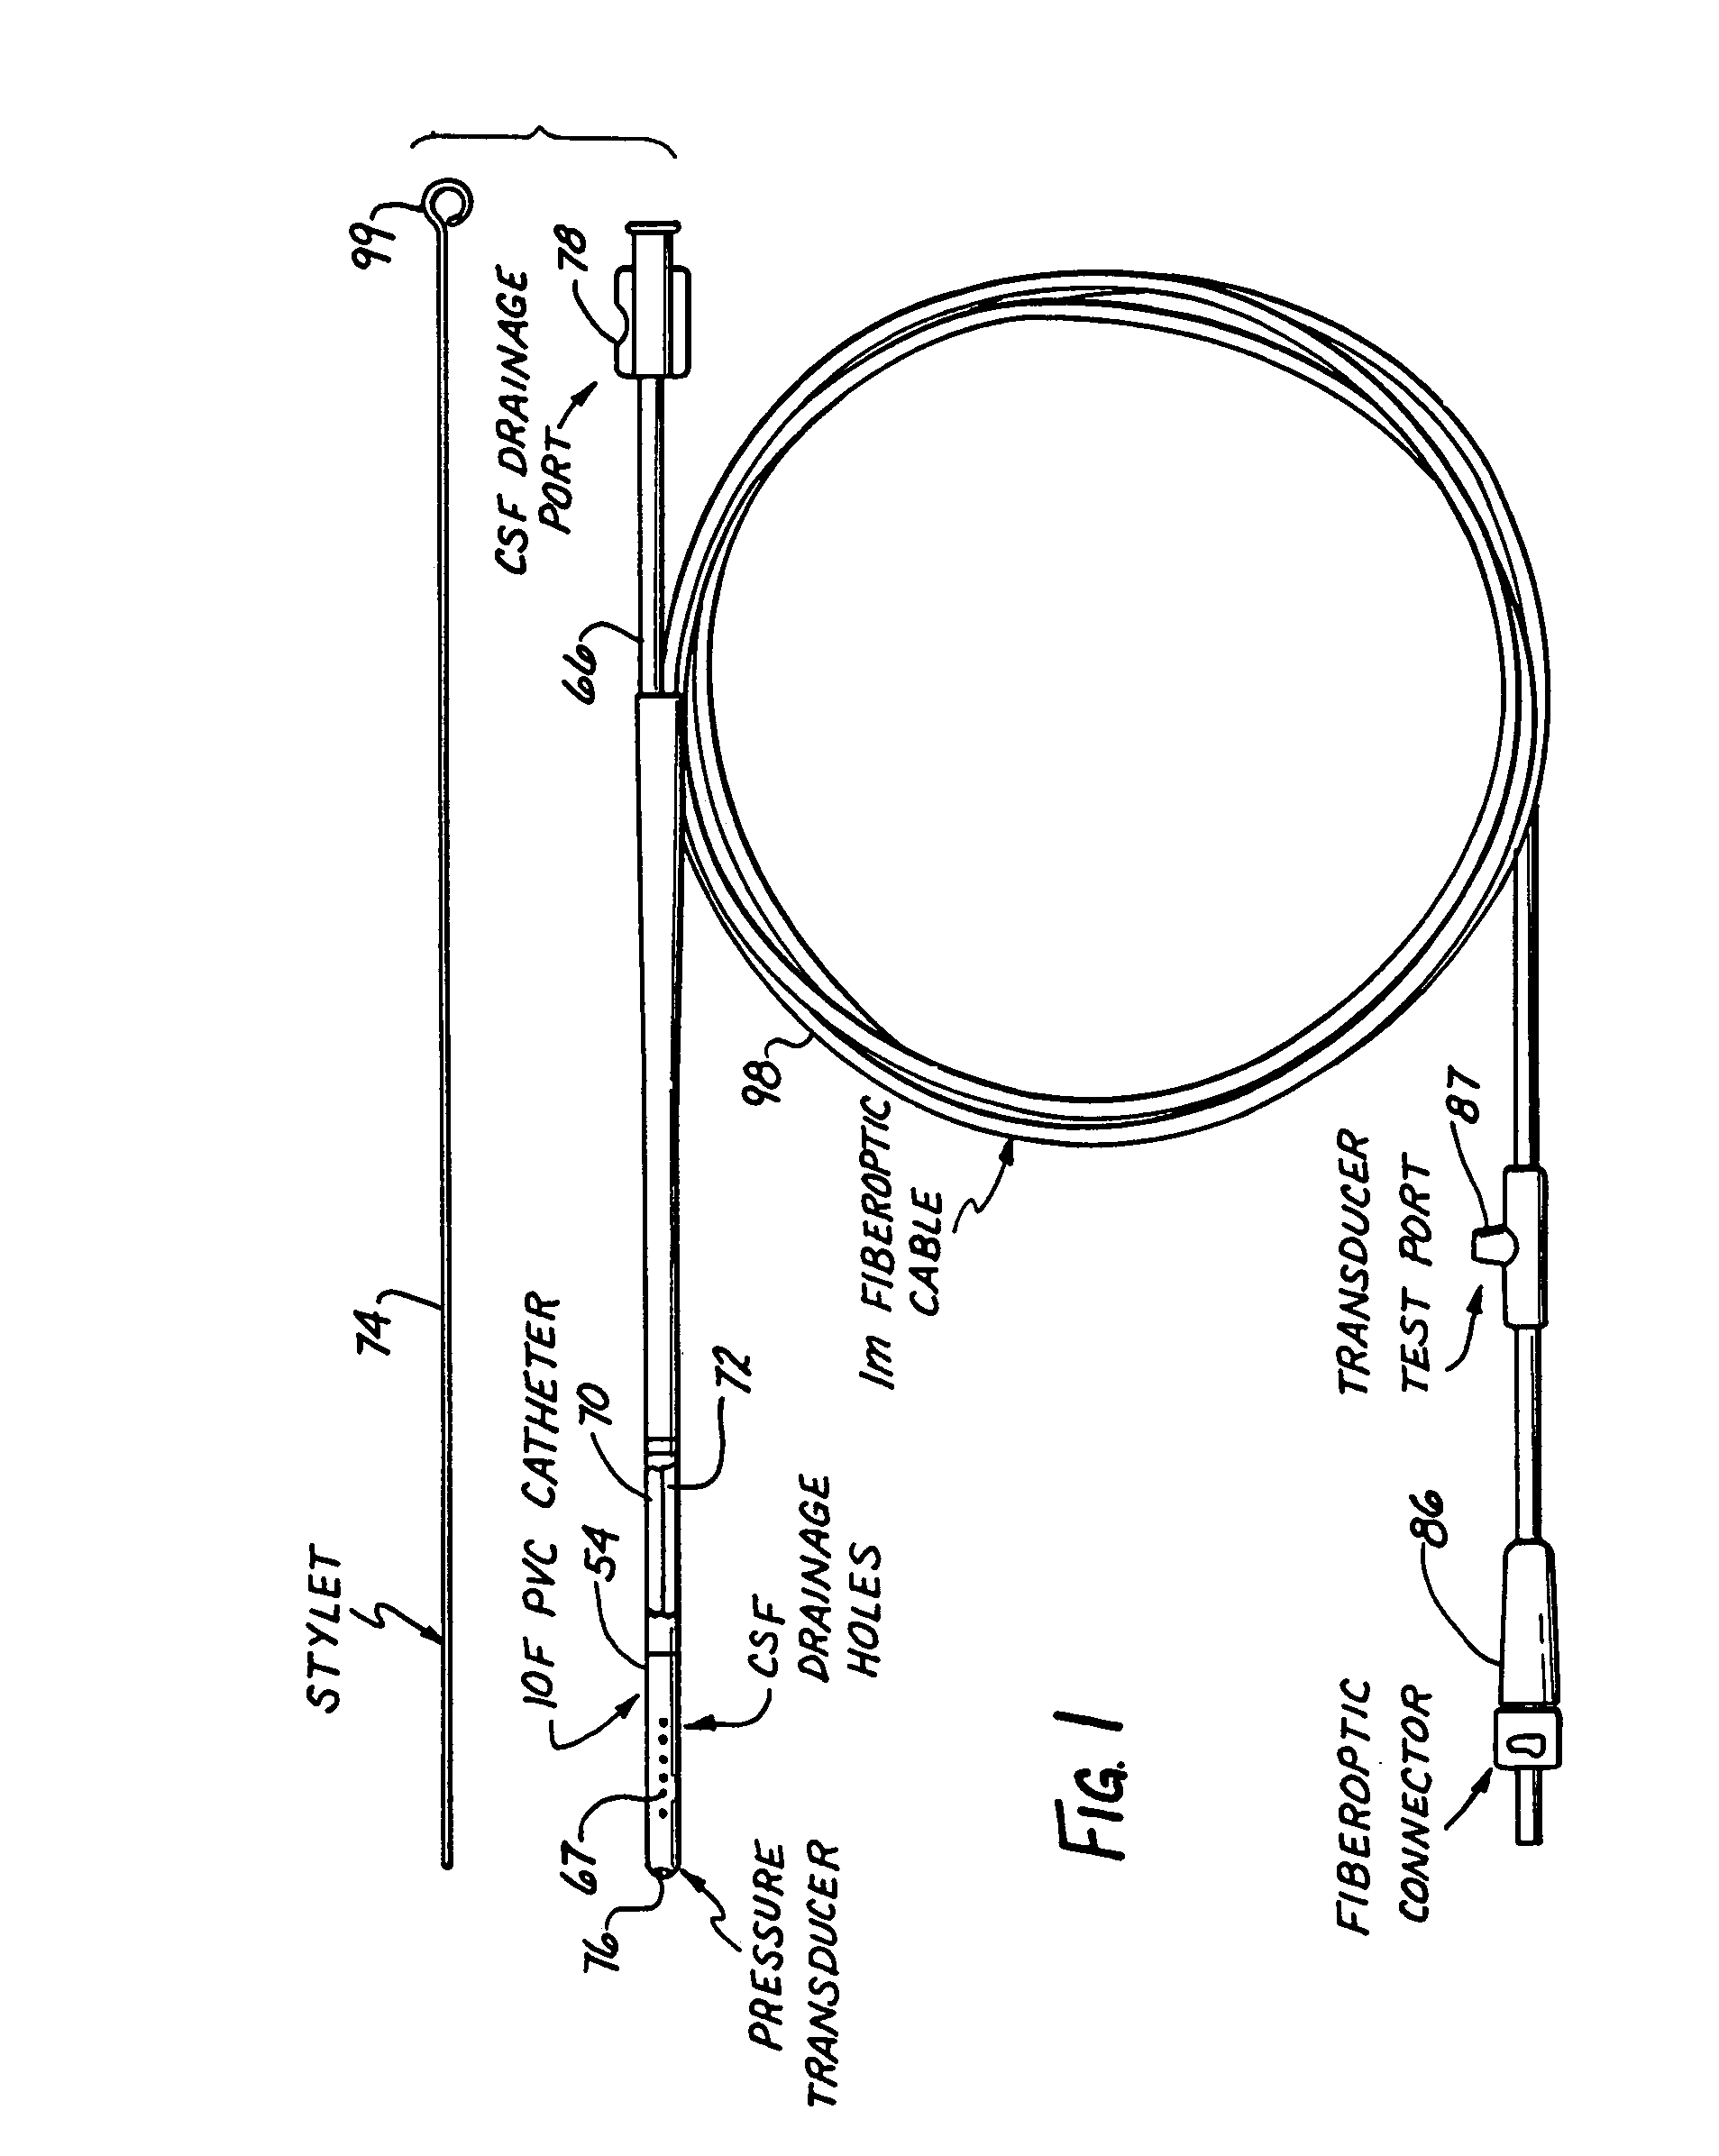 Intracranial pressure monitor and drainage catheter assembly